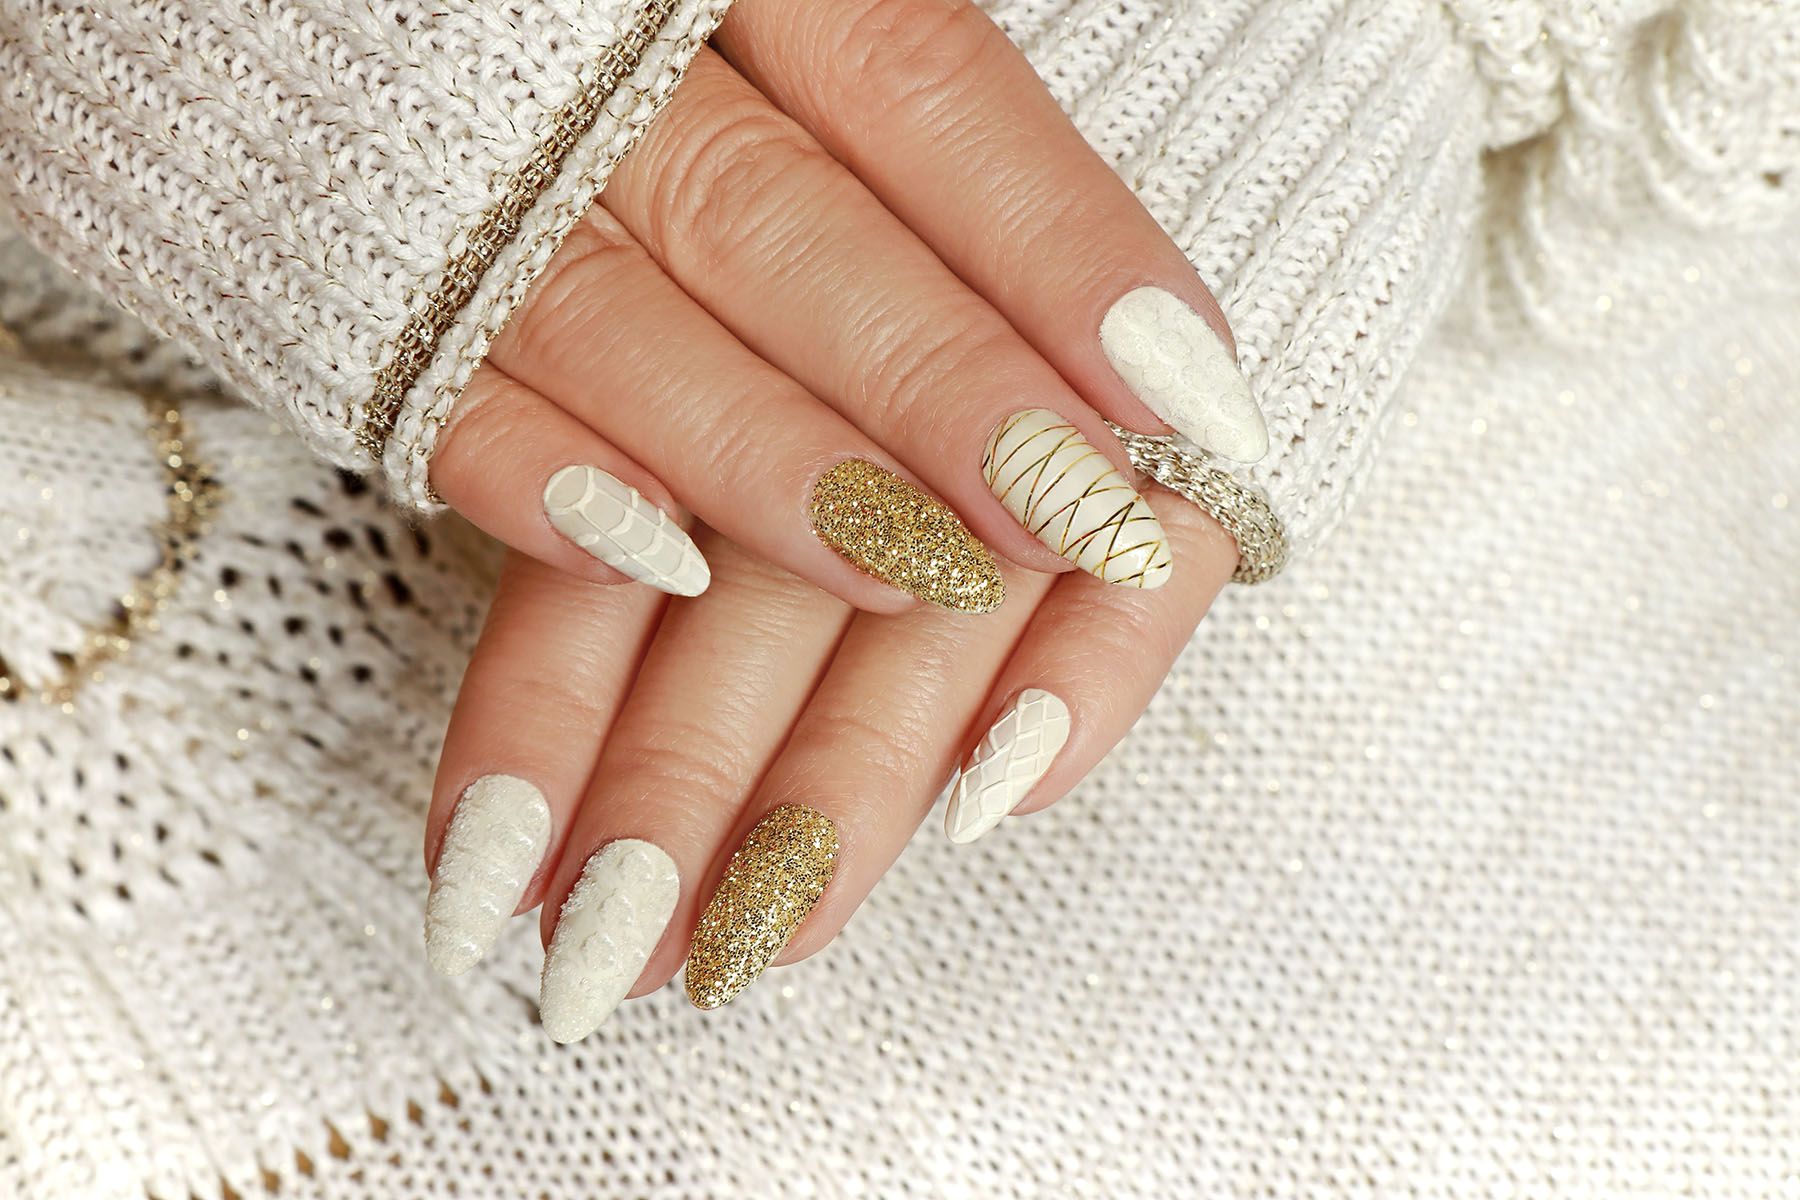 30 Beautiful Nail Designs To Do In 2021  The Glossychic